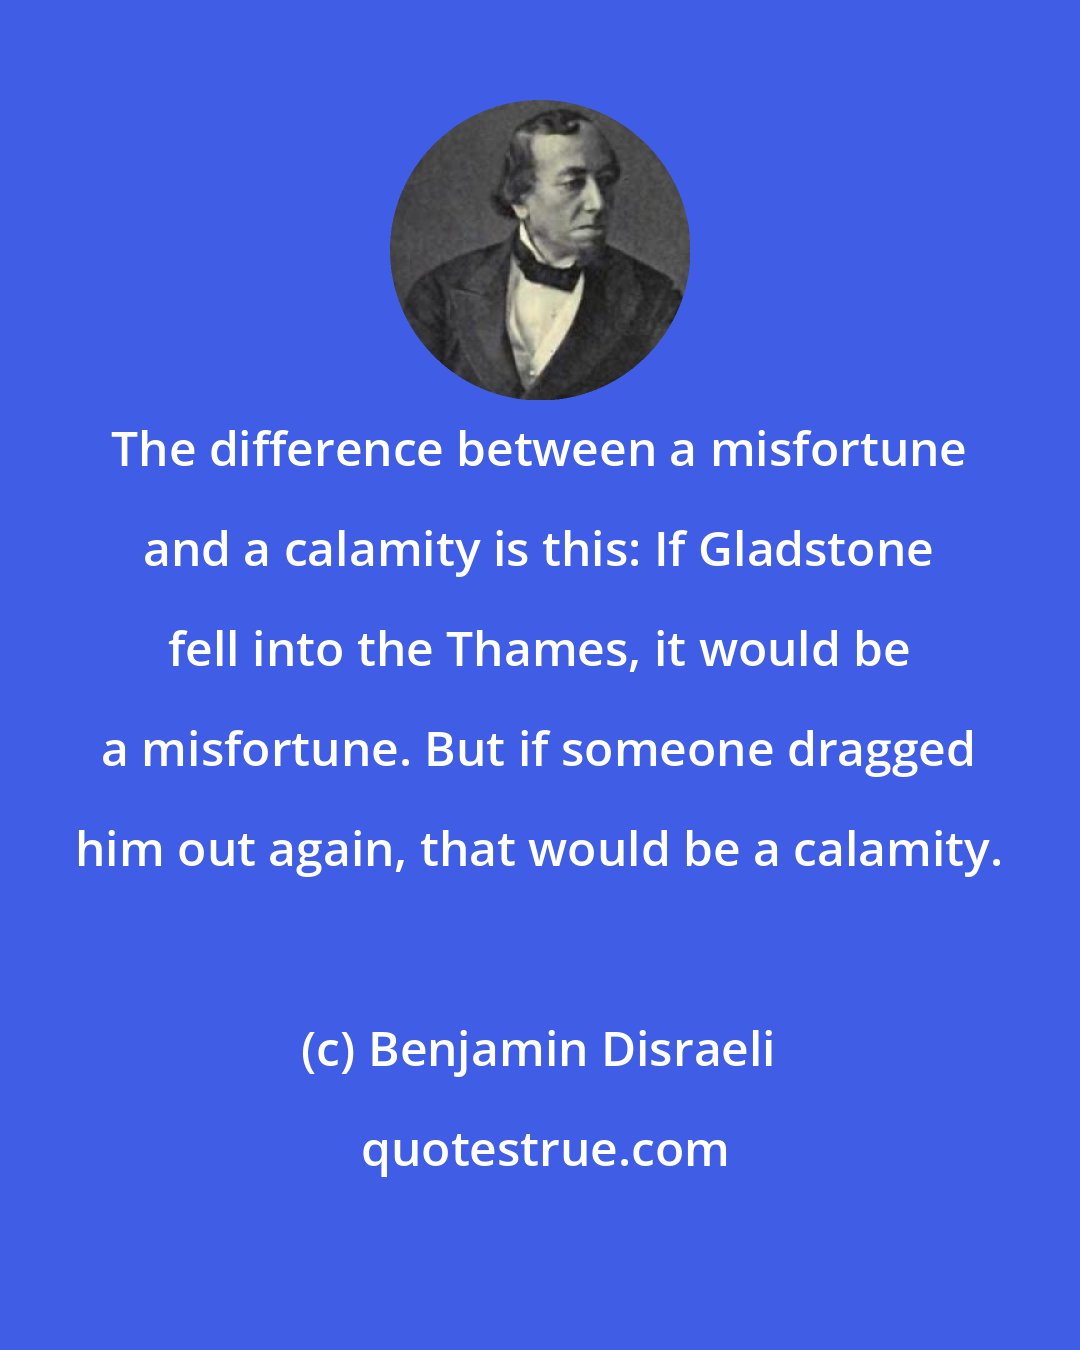 Benjamin Disraeli: The difference between a misfortune and a calamity is this: If Gladstone fell into the Thames, it would be a misfortune. But if someone dragged him out again, that would be a calamity.